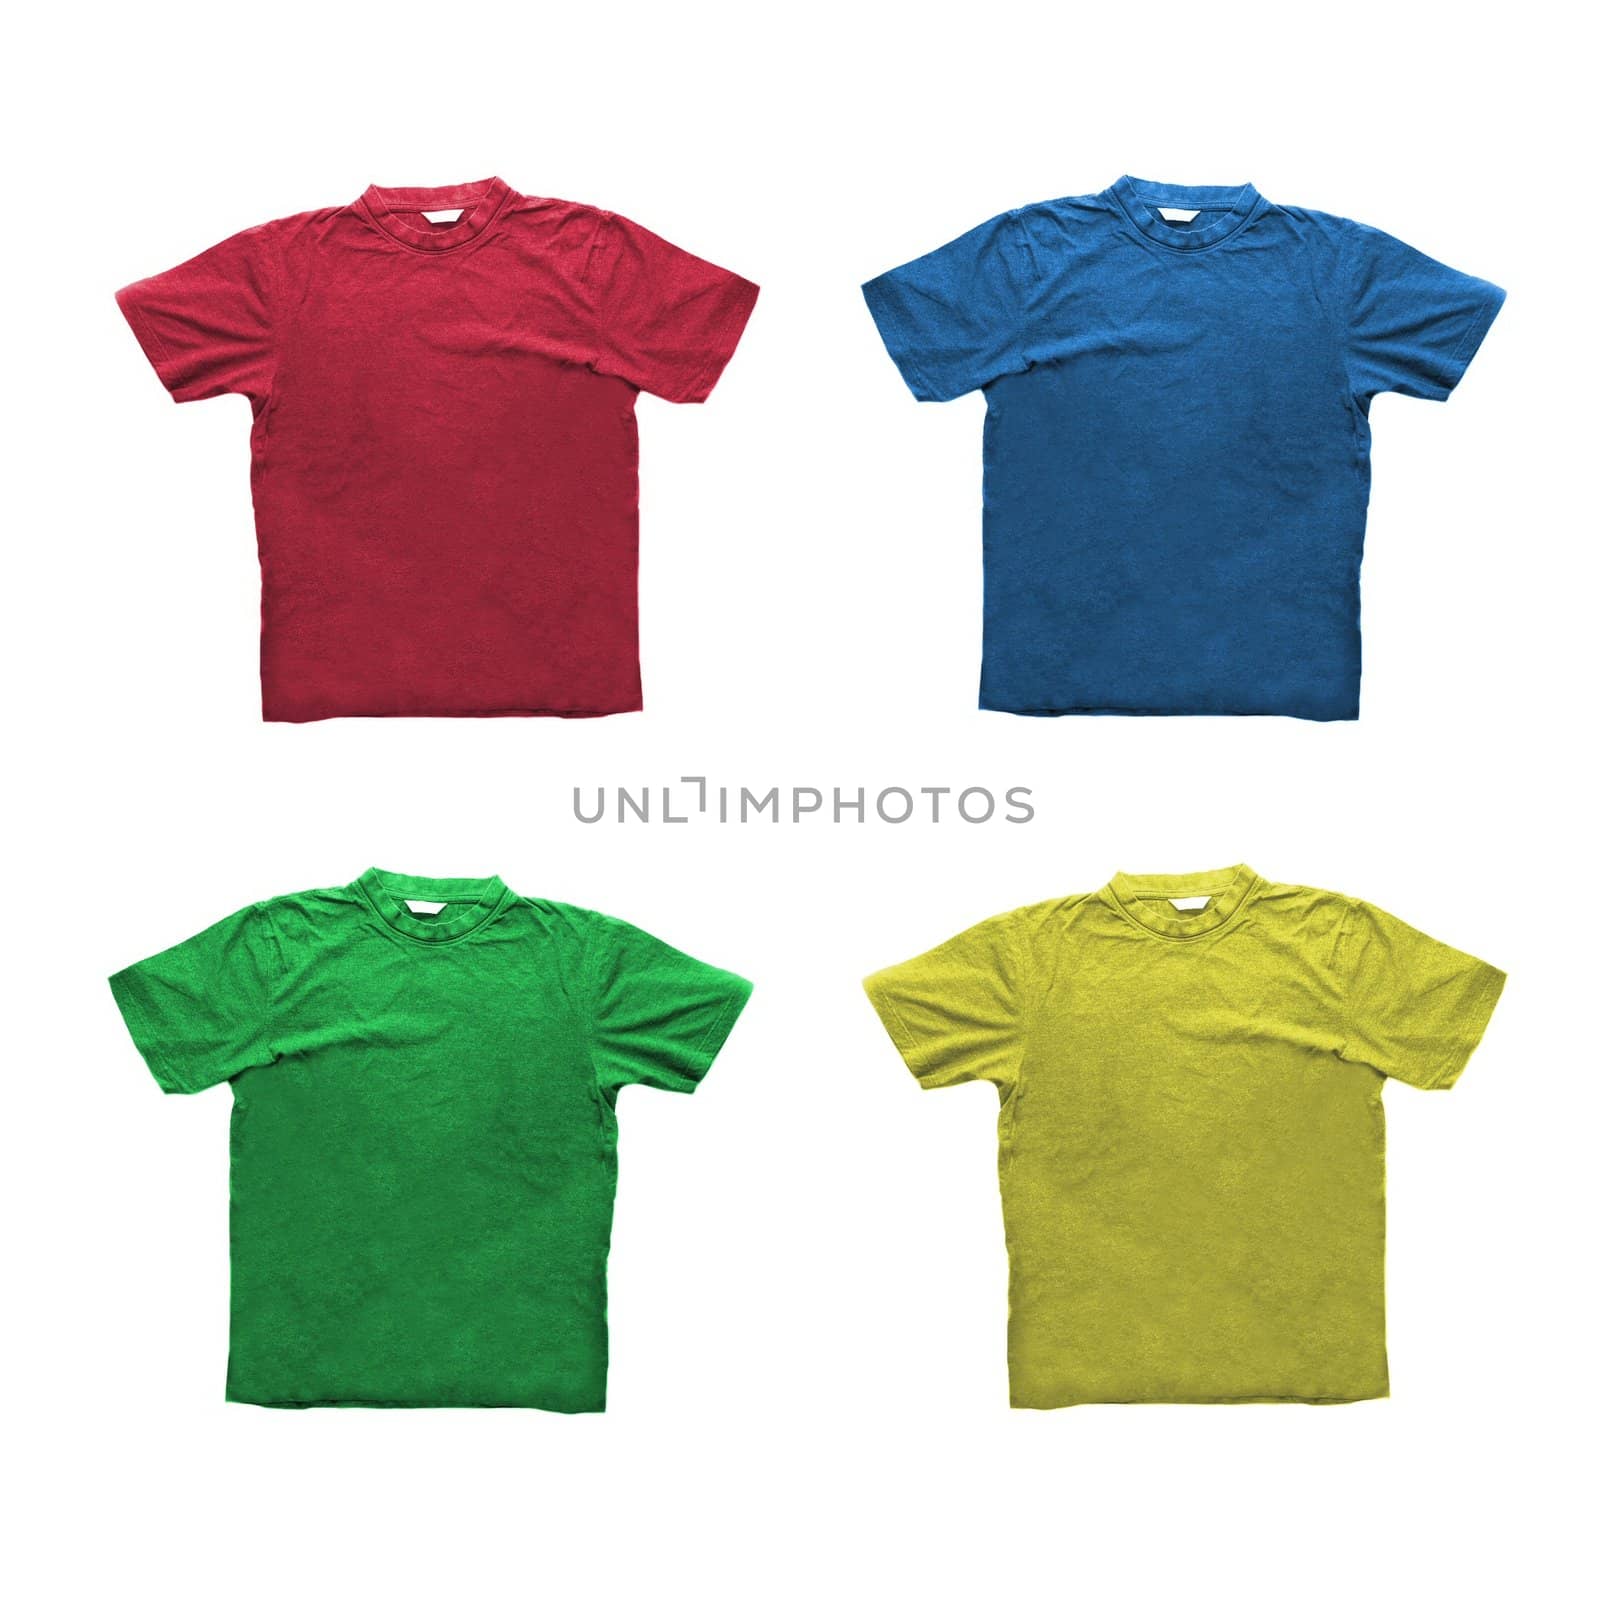 Four generic t-shirts in different colors